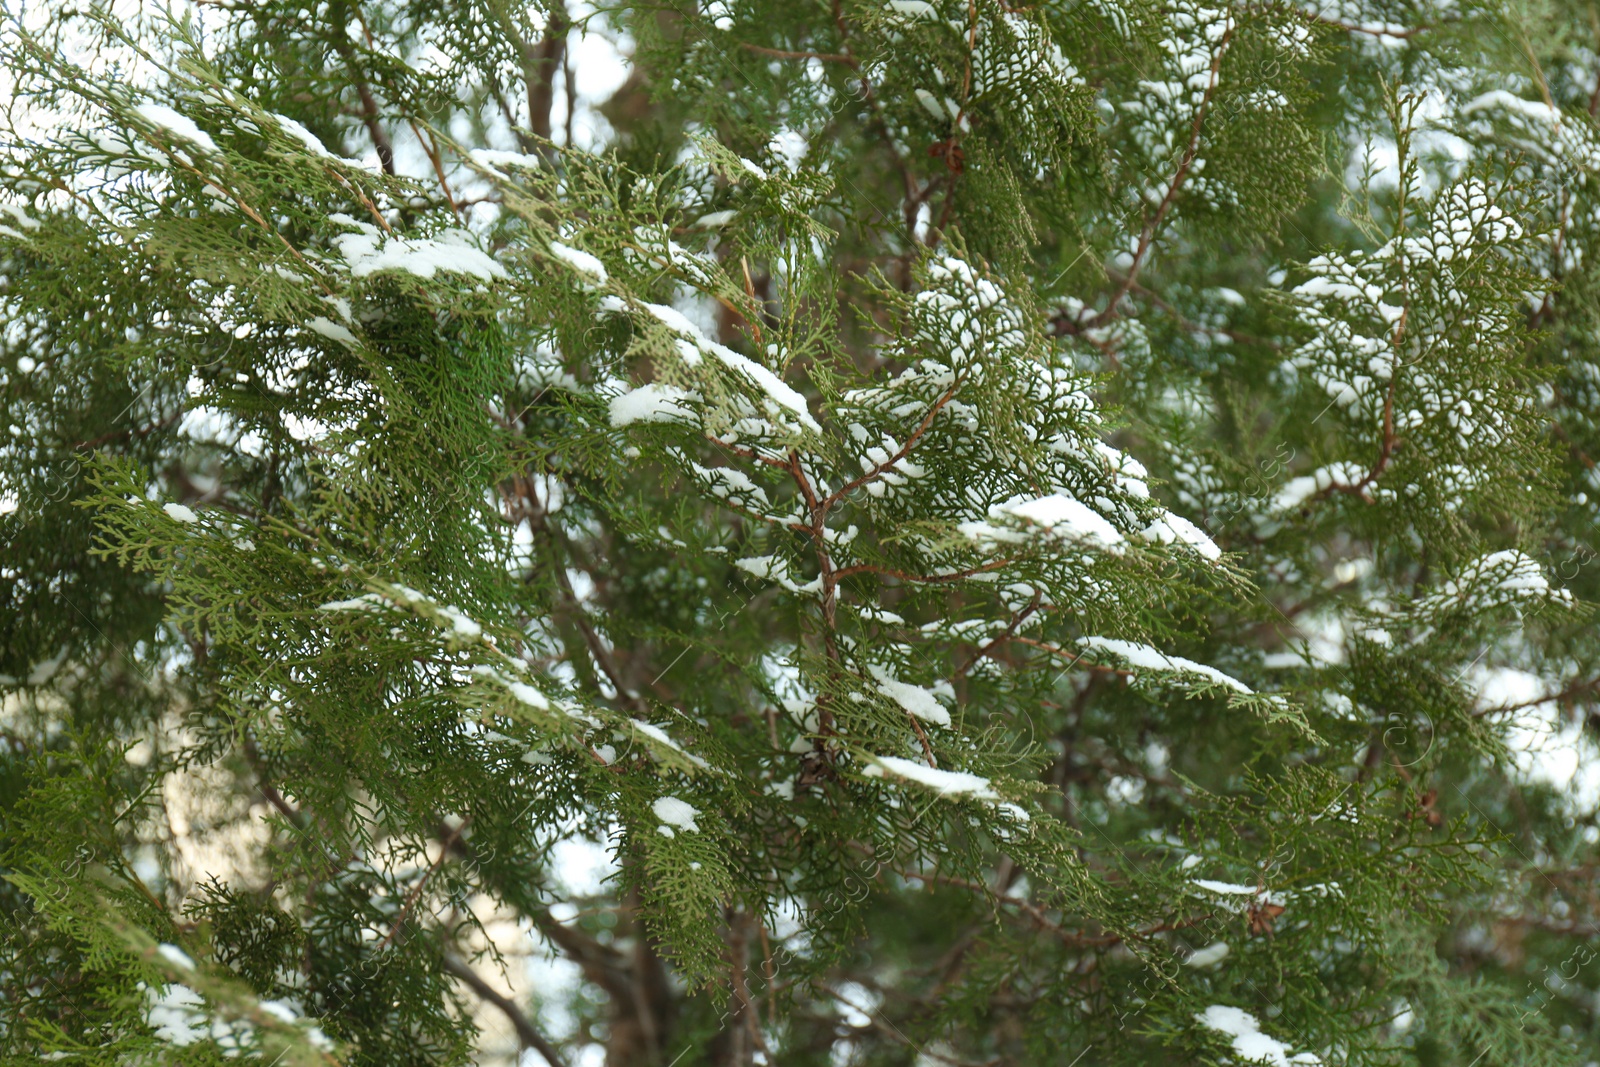 Photo of Thuja branches covered with fresh snow outdoors